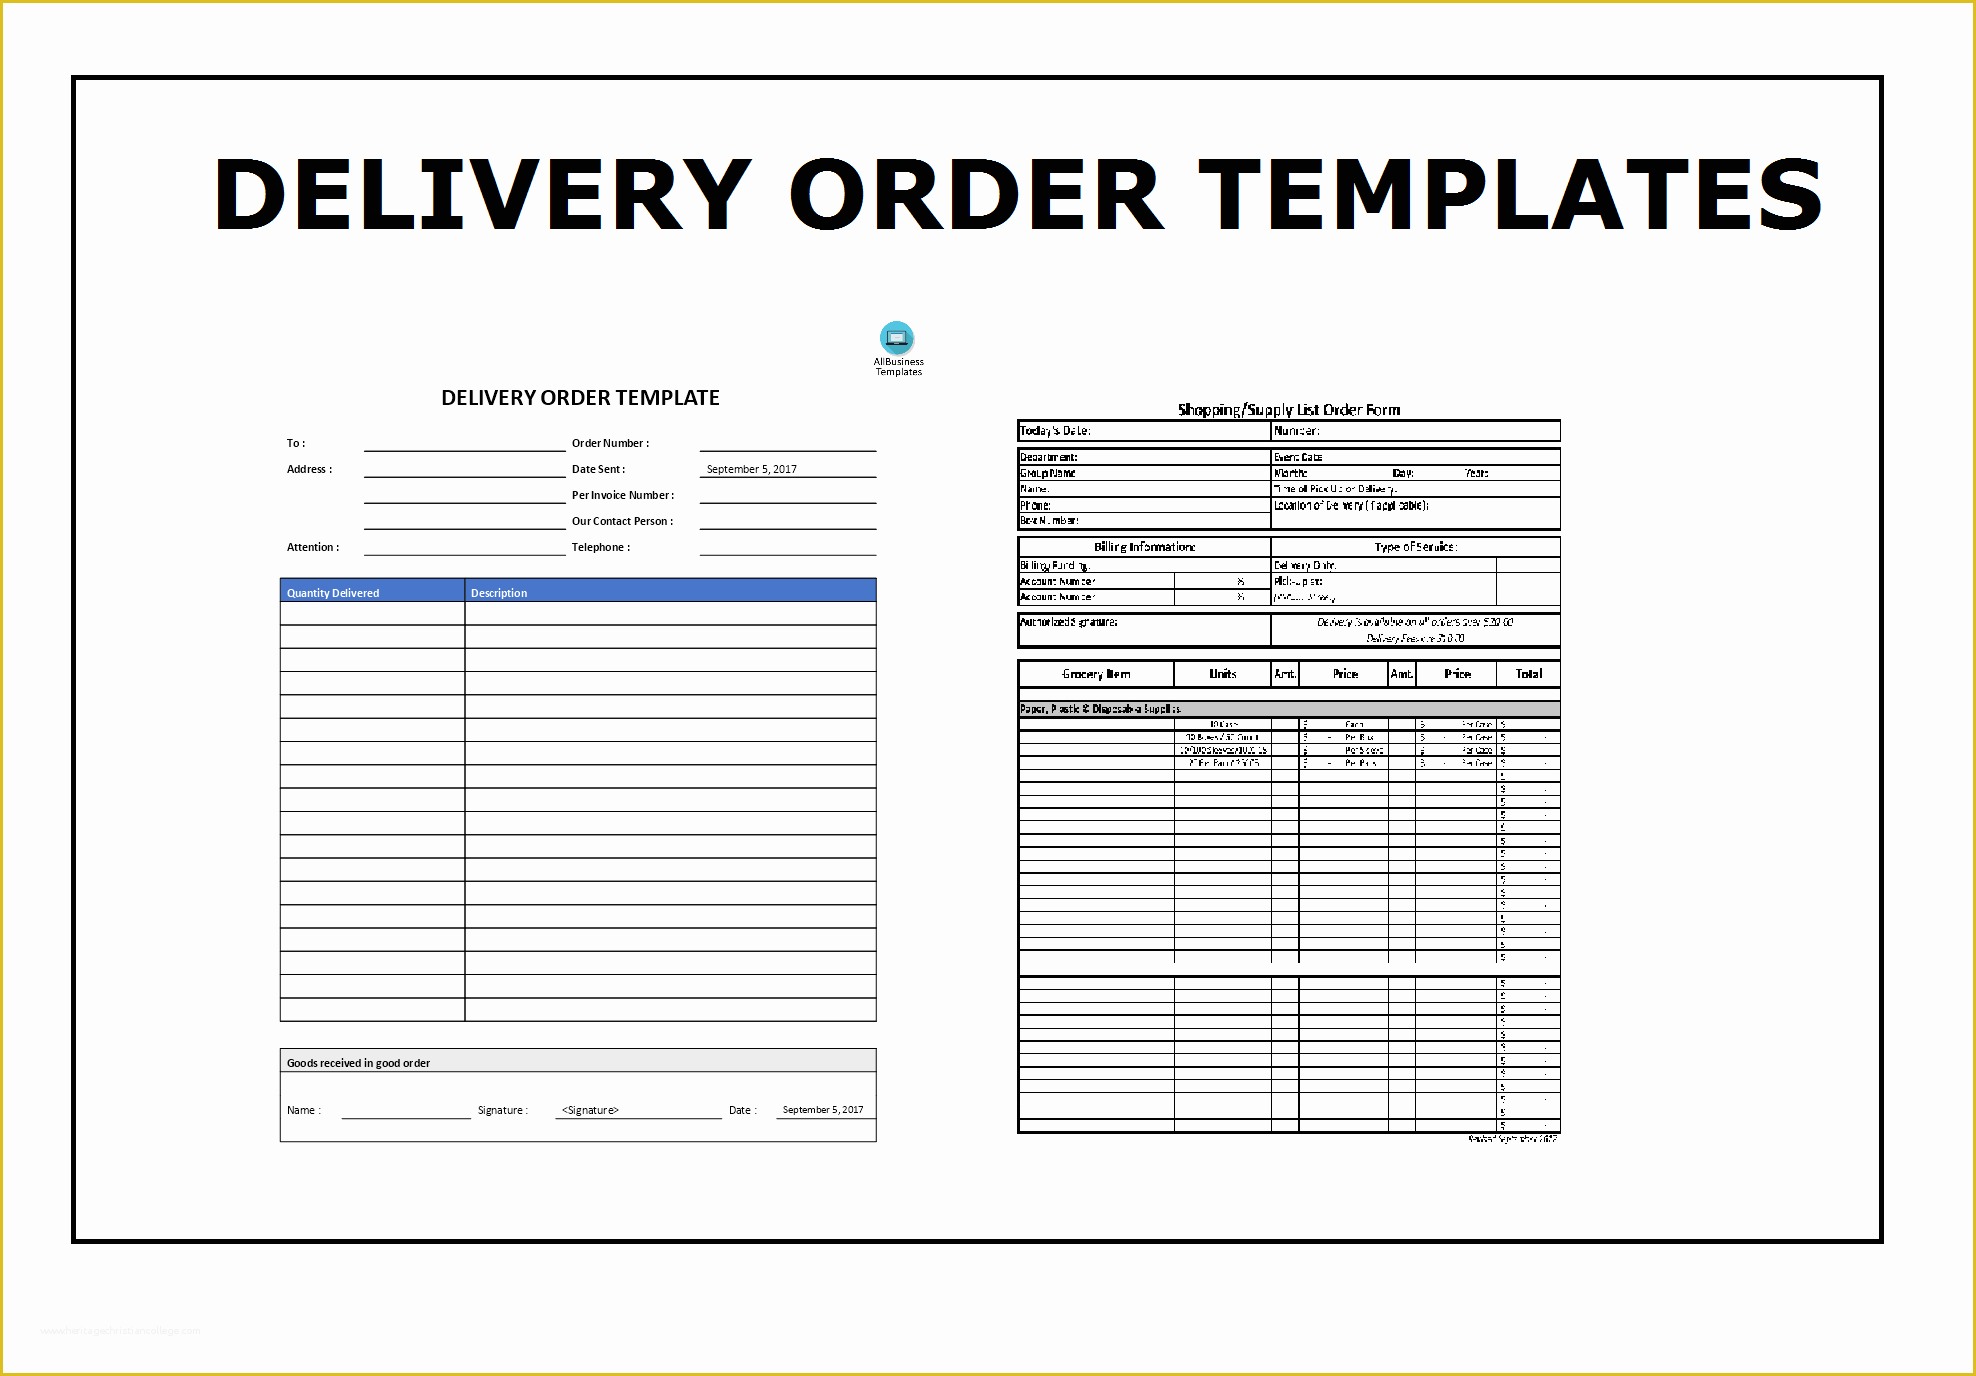 Free Section 125 Plan Document Template Of Delivery order Template Gallery Template Design Ideas